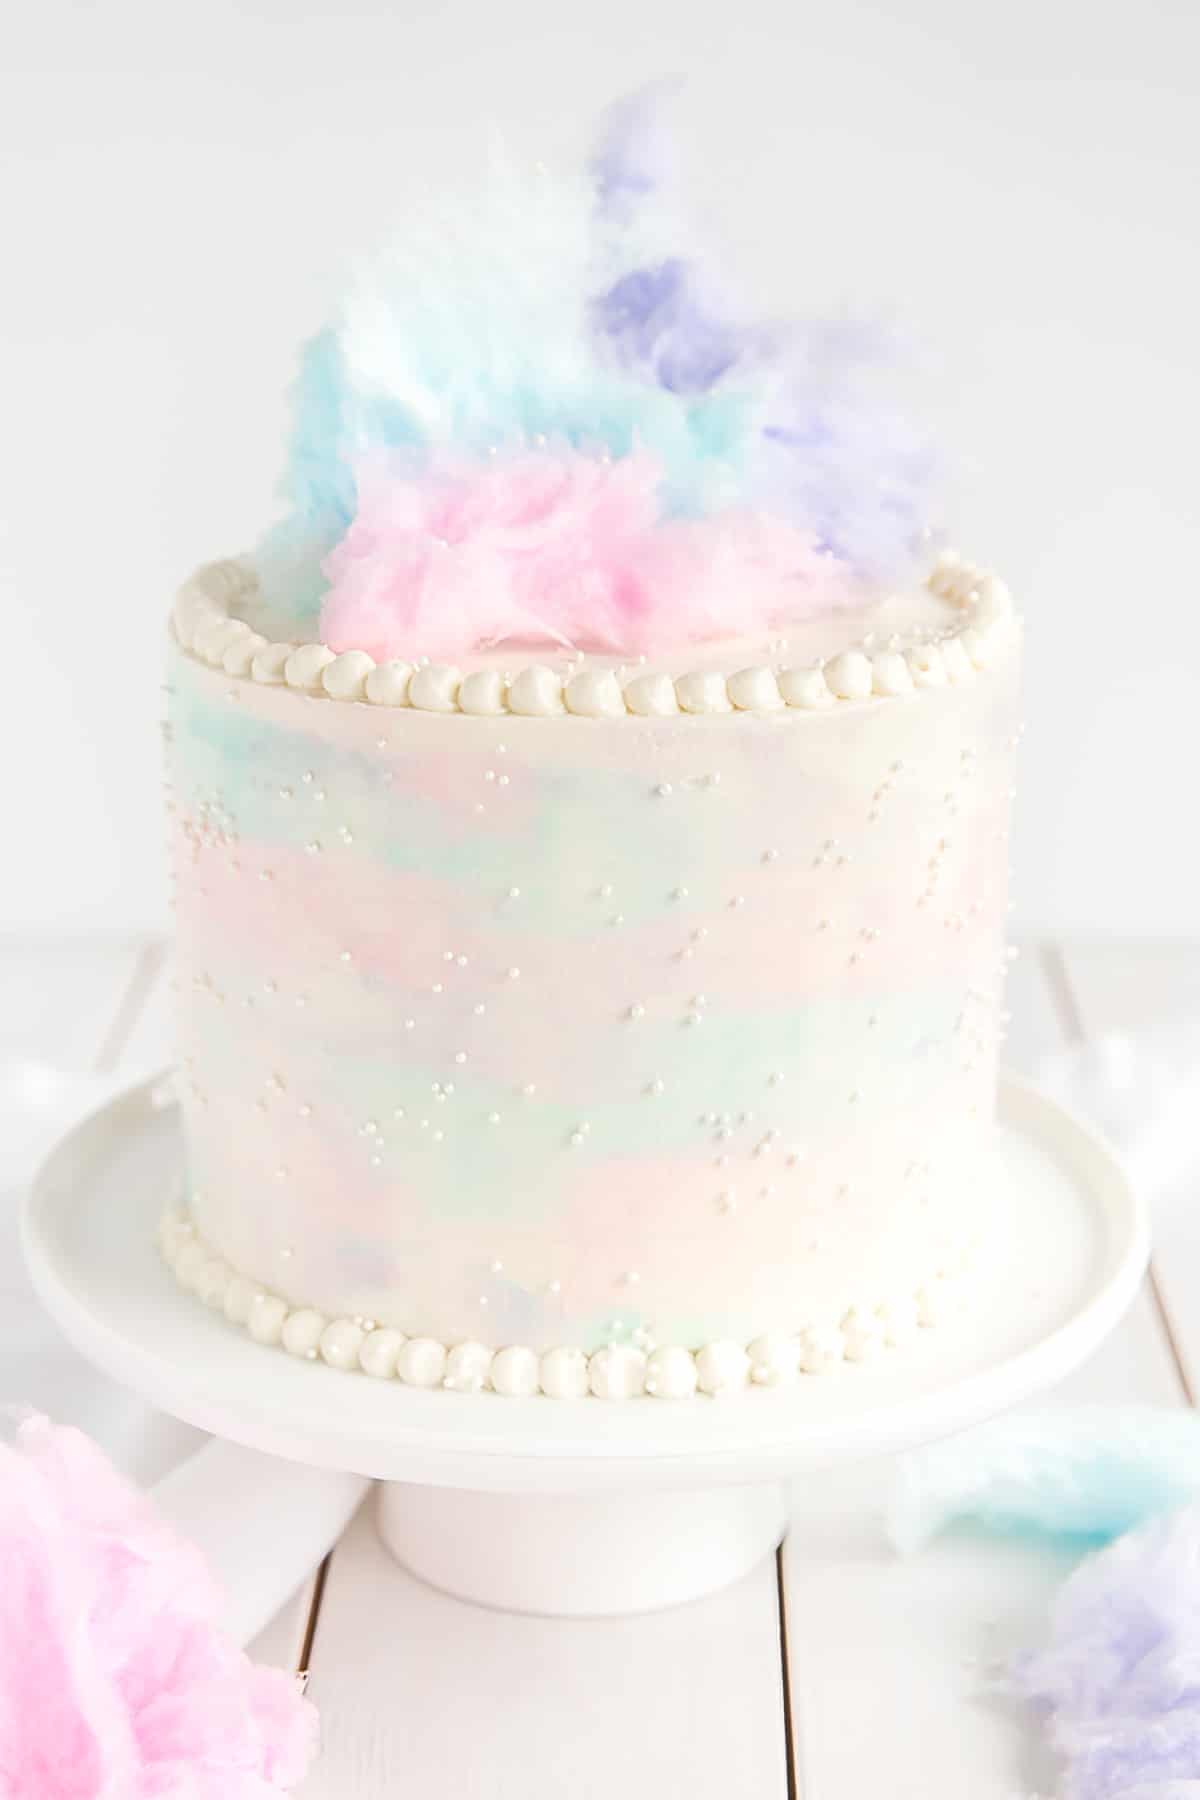 Cotton Candy Cake with watercolor frosting and cotton candy on top.